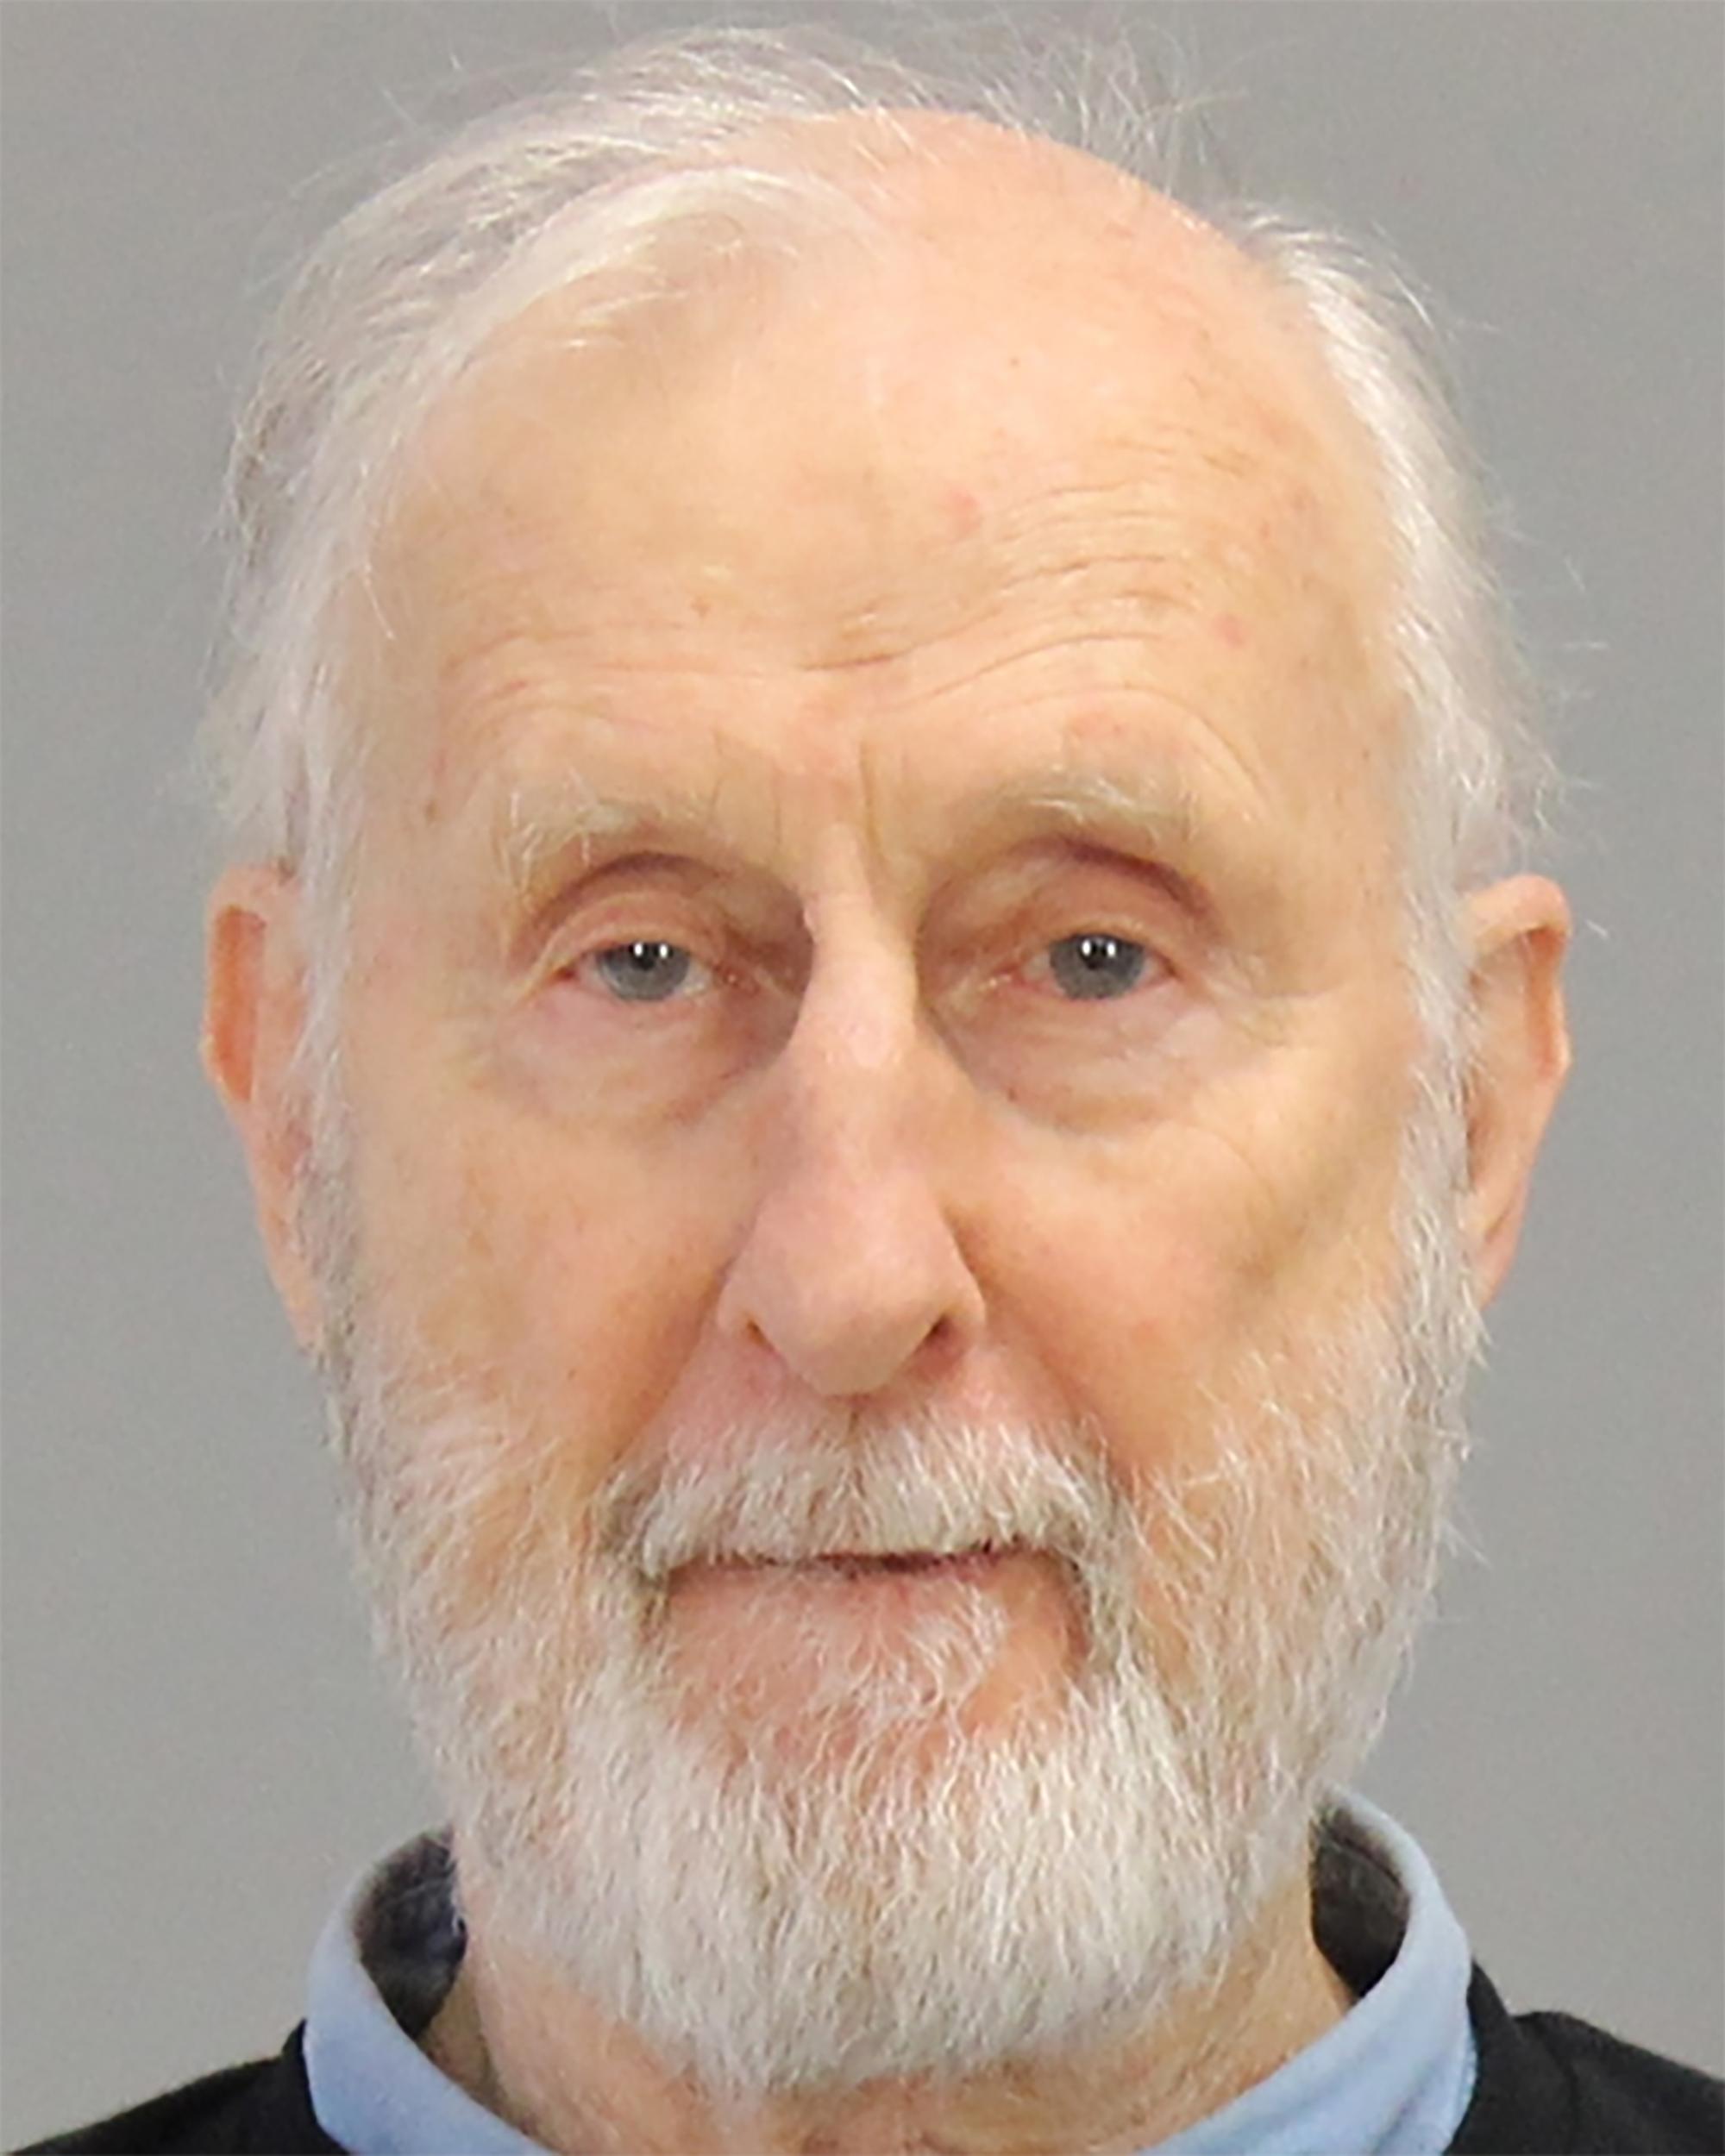 James Cromwell arrested while protesting animal cruelty